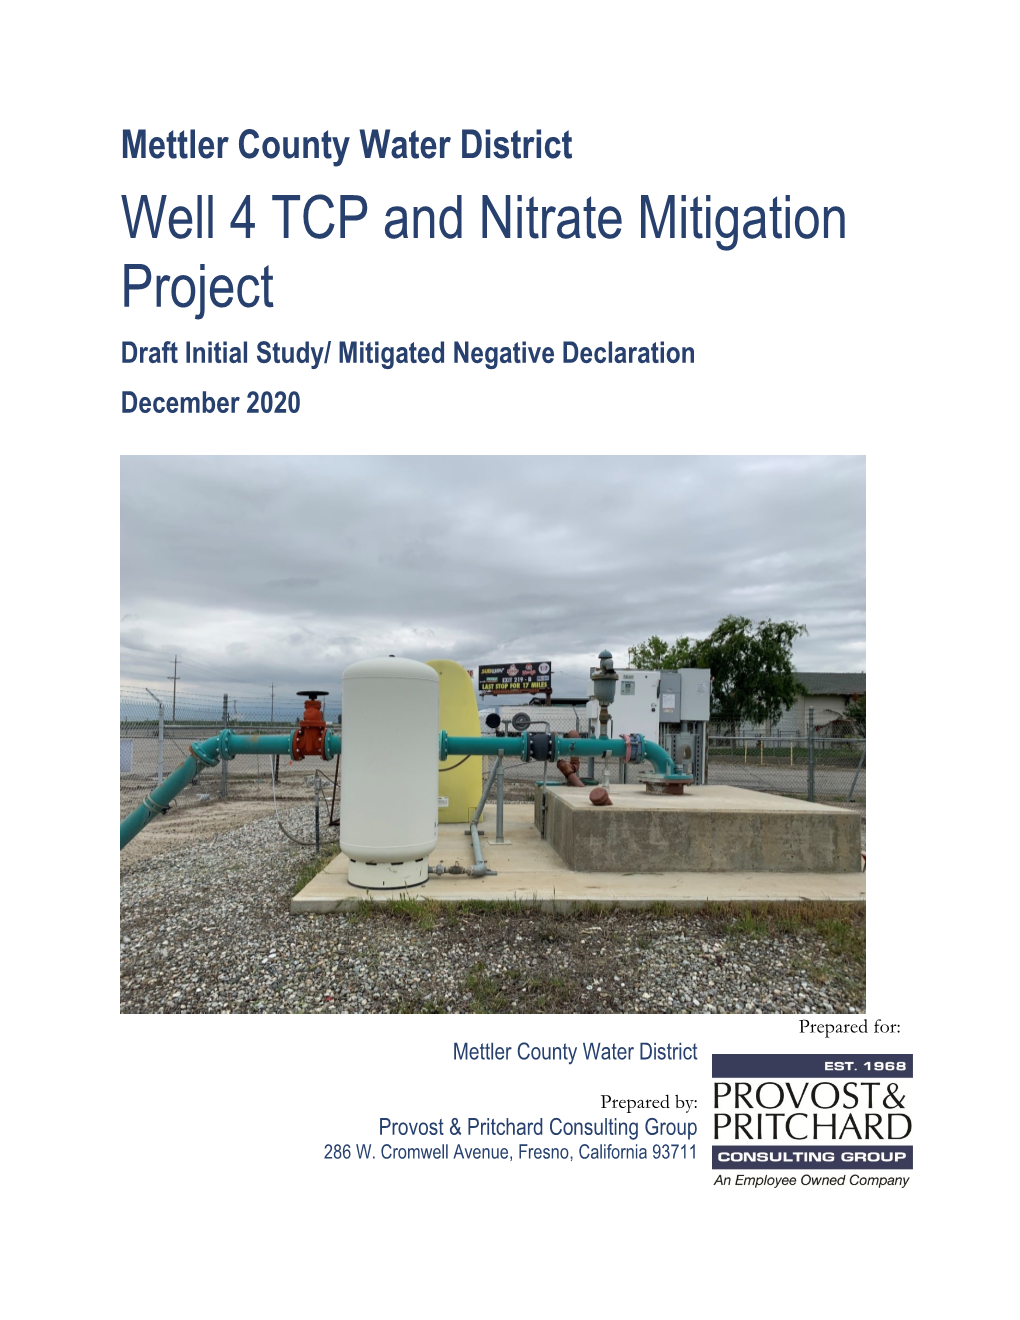 Well 4 TCP and Nitrate Mitigation Project